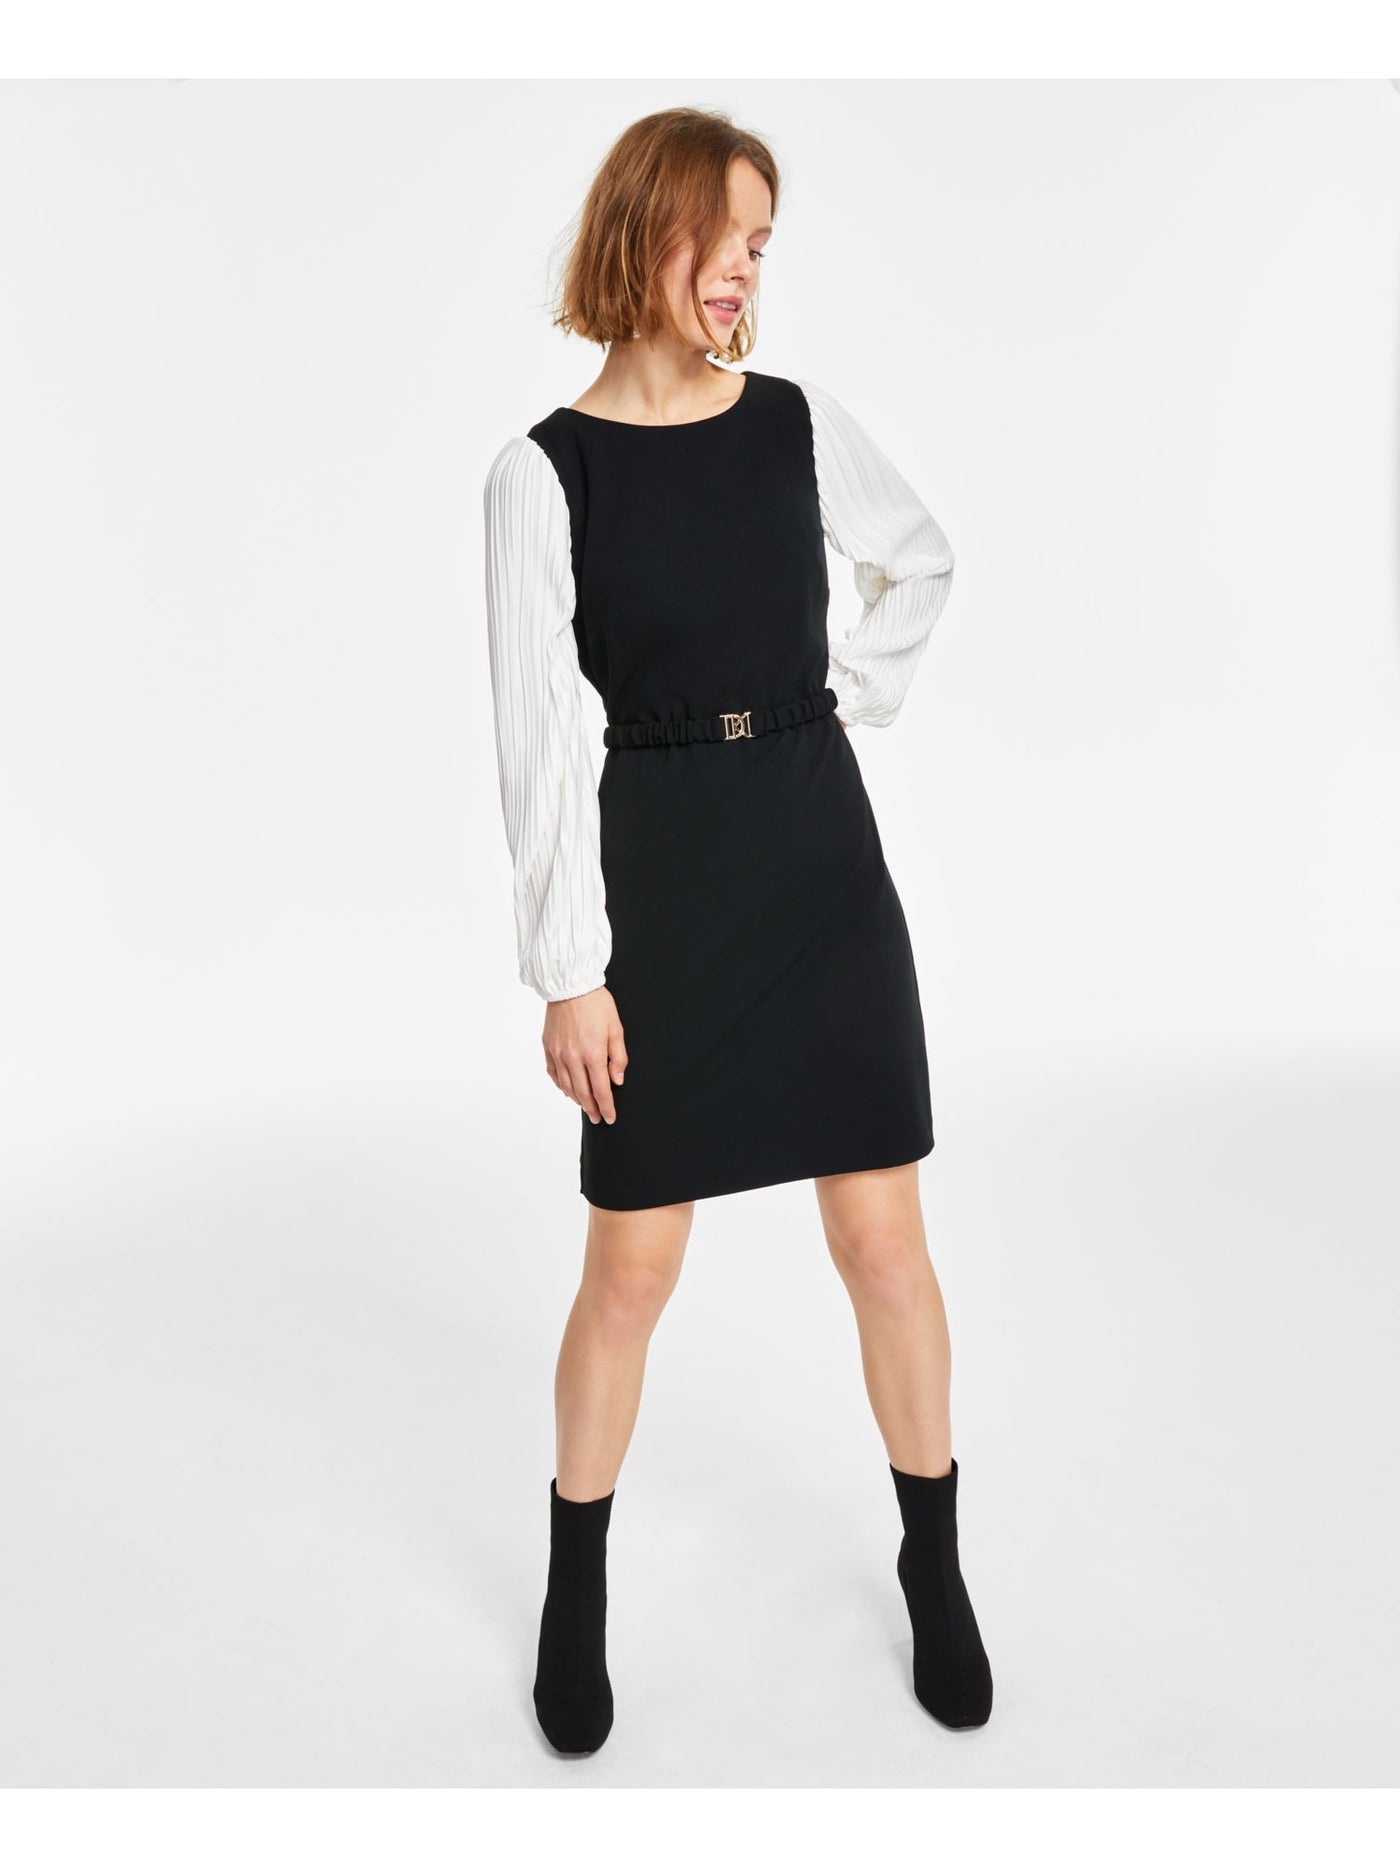 DKNY Womens Black Zippered Belted Pleated Long Sleeves Color Block Round Neck Above The Knee Wear To Work Sheath Dress 2